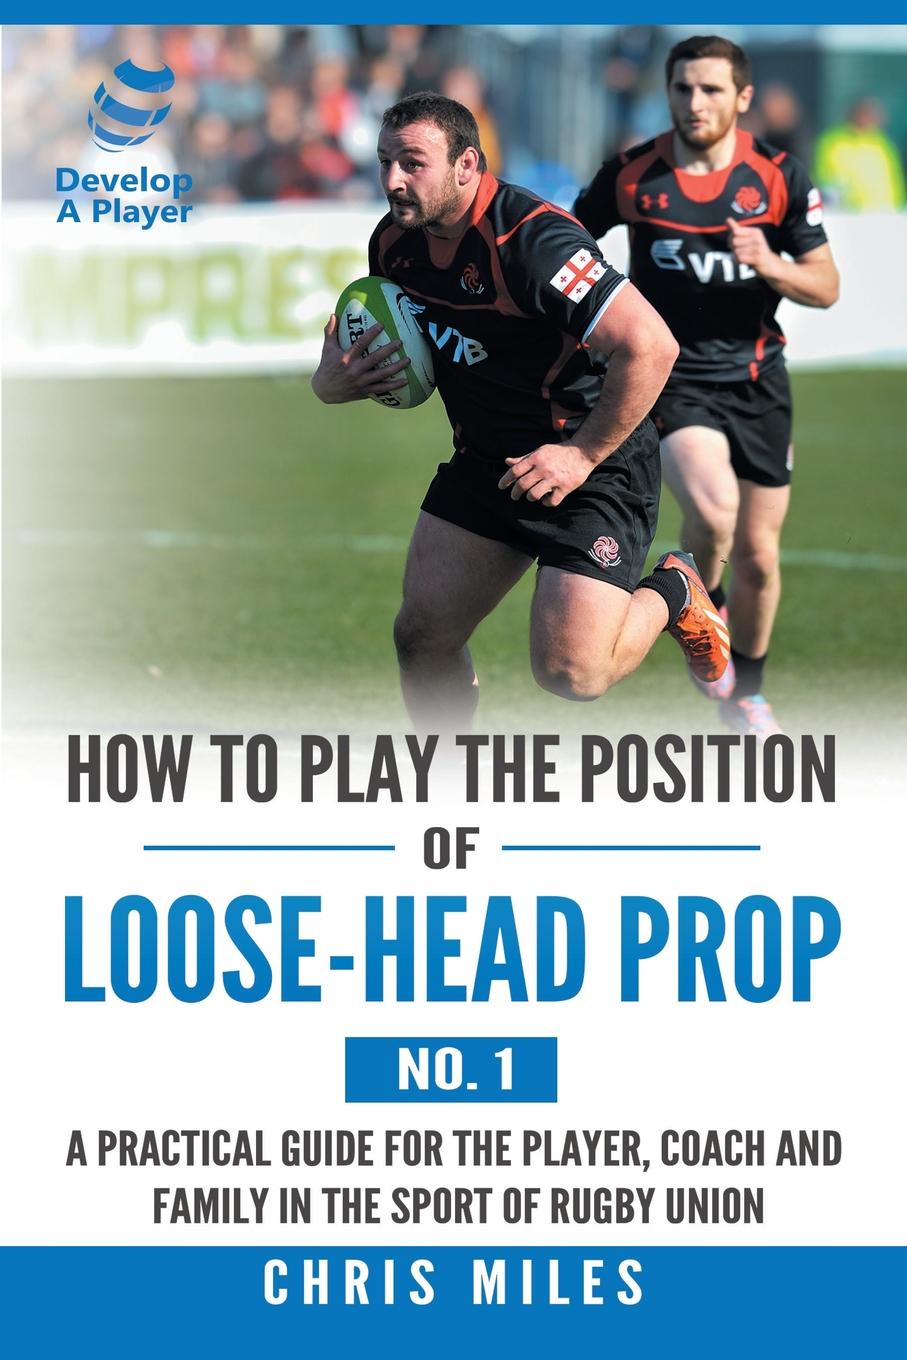 How to Play the Position of Loose-Head Prop (No. 1). A Practicl Guide for the Player, Coach and Family in the Sport of Rugby Union